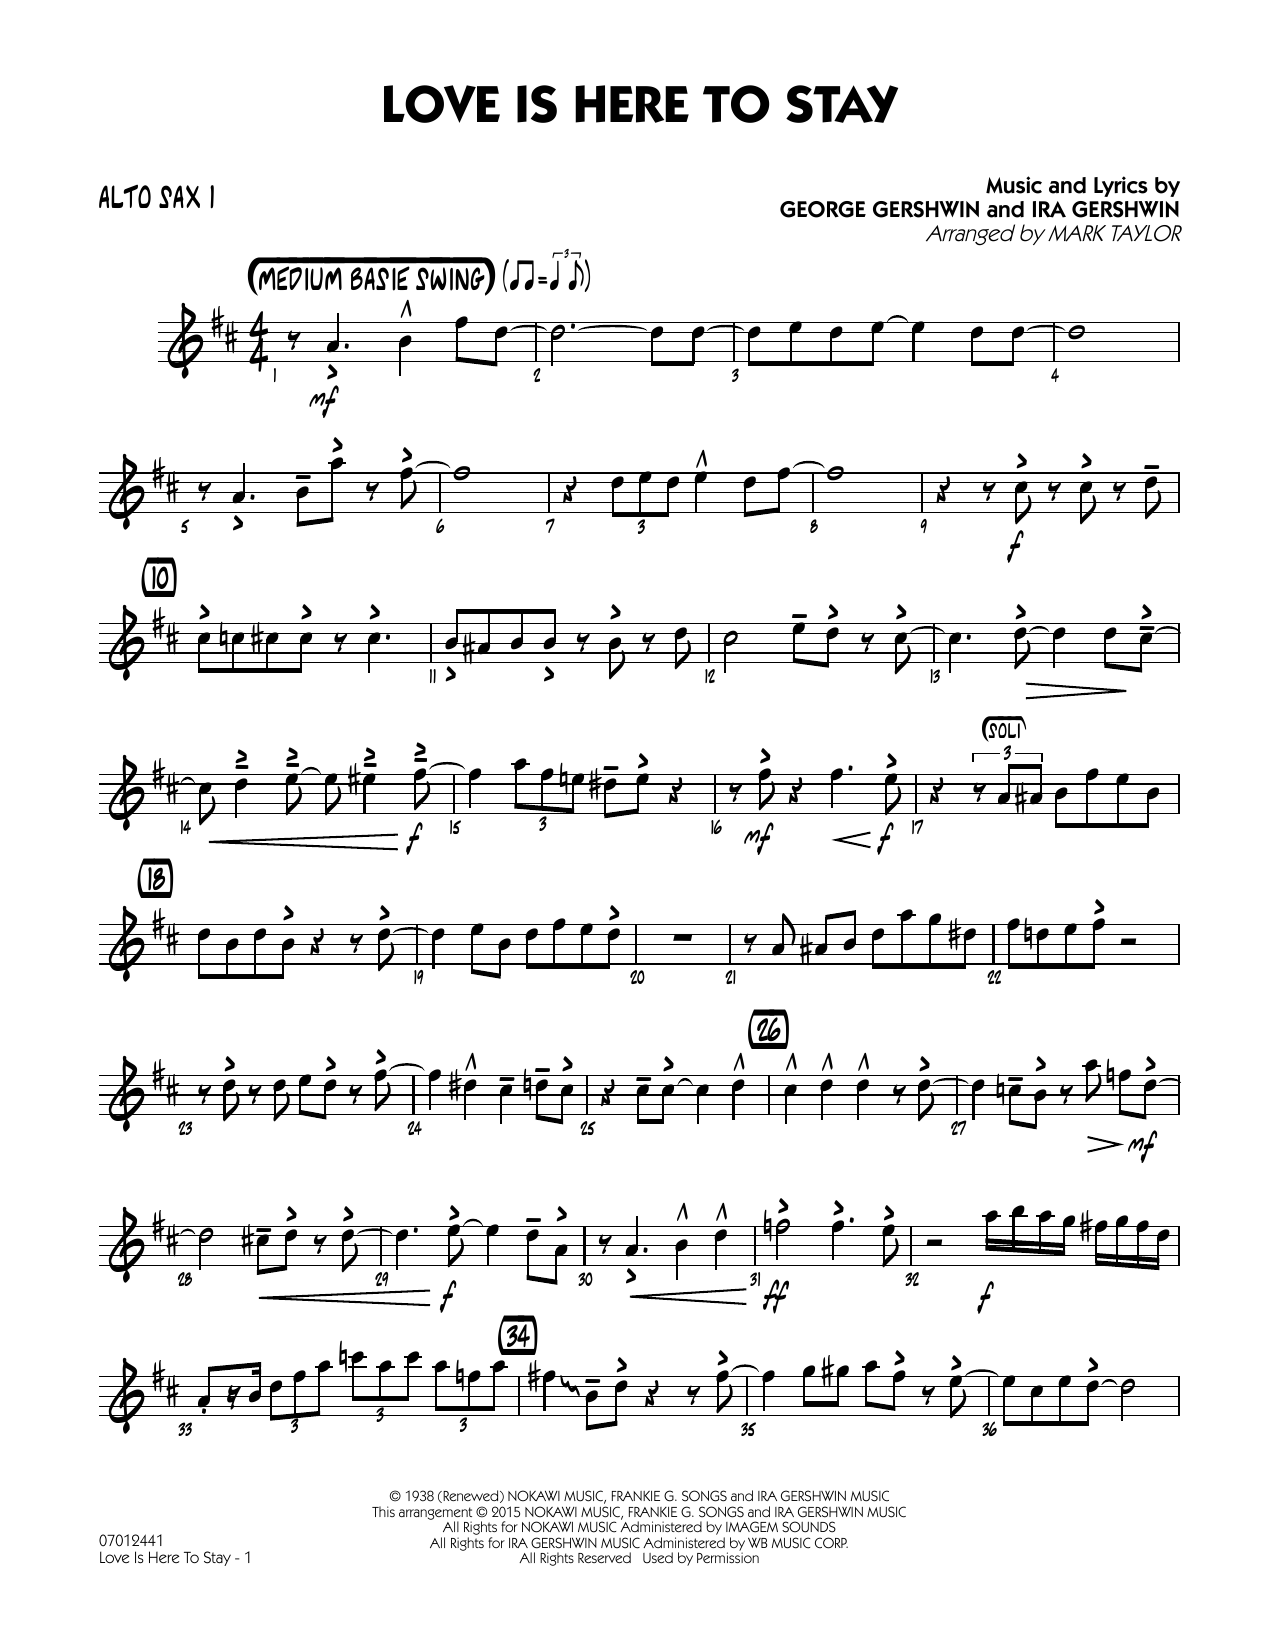 Mark Taylor Love Is Here to Stay - Alto Sax 1 sheet music notes and chords. Download Printable PDF.